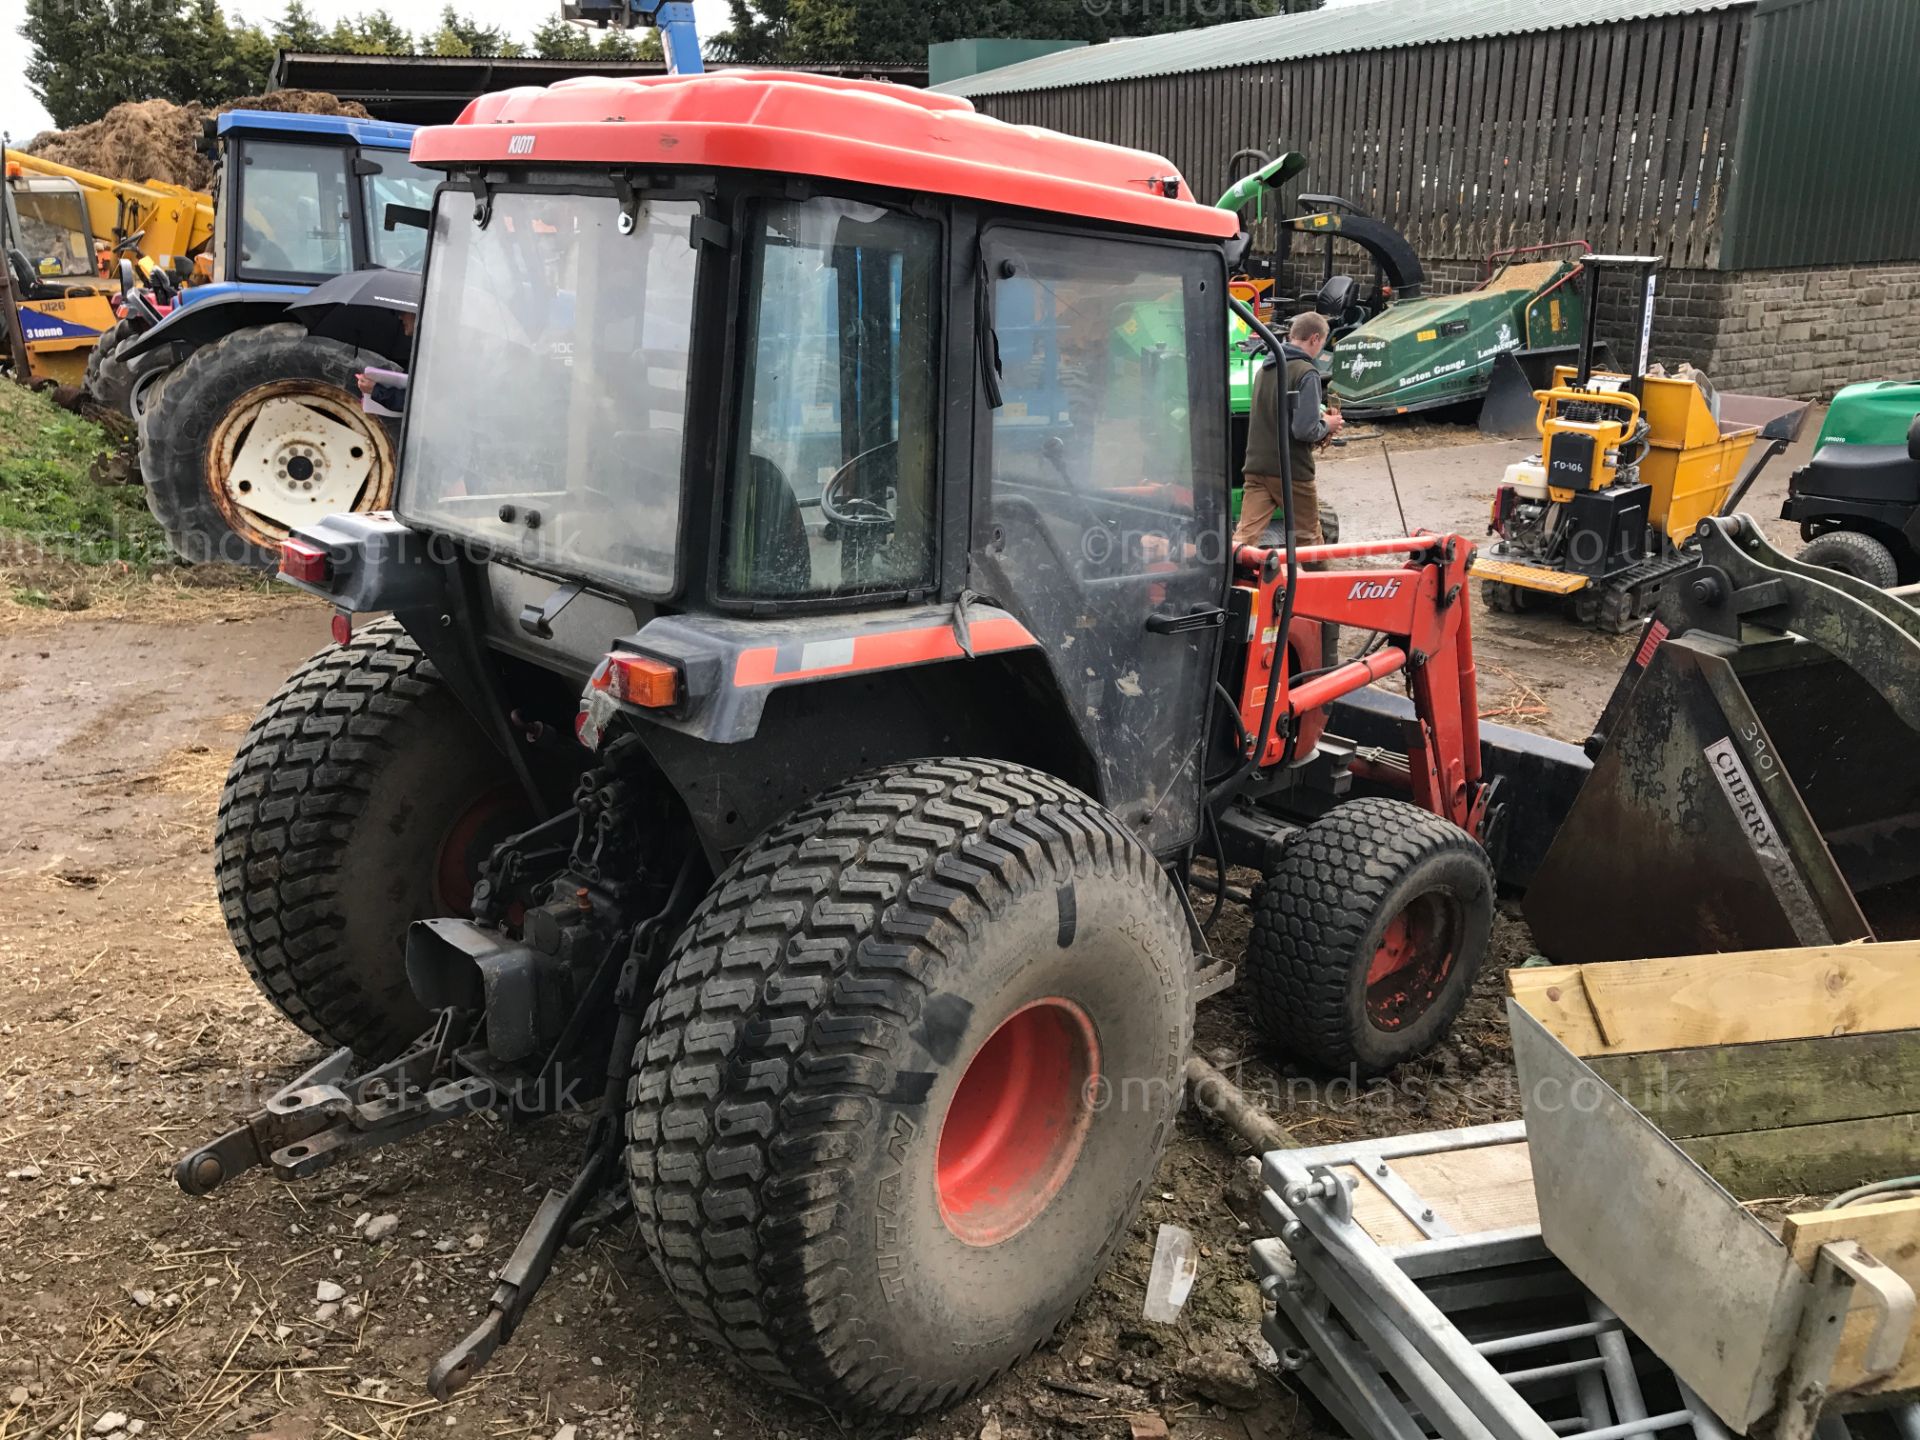 KIOTI 25 BHP TRACTOR   YEAR UNKNOWN FRONT LOADER 25 BHP GOOD WORKING ORDER SHOWING 4,963 HOURS (UN- - Image 9 of 10